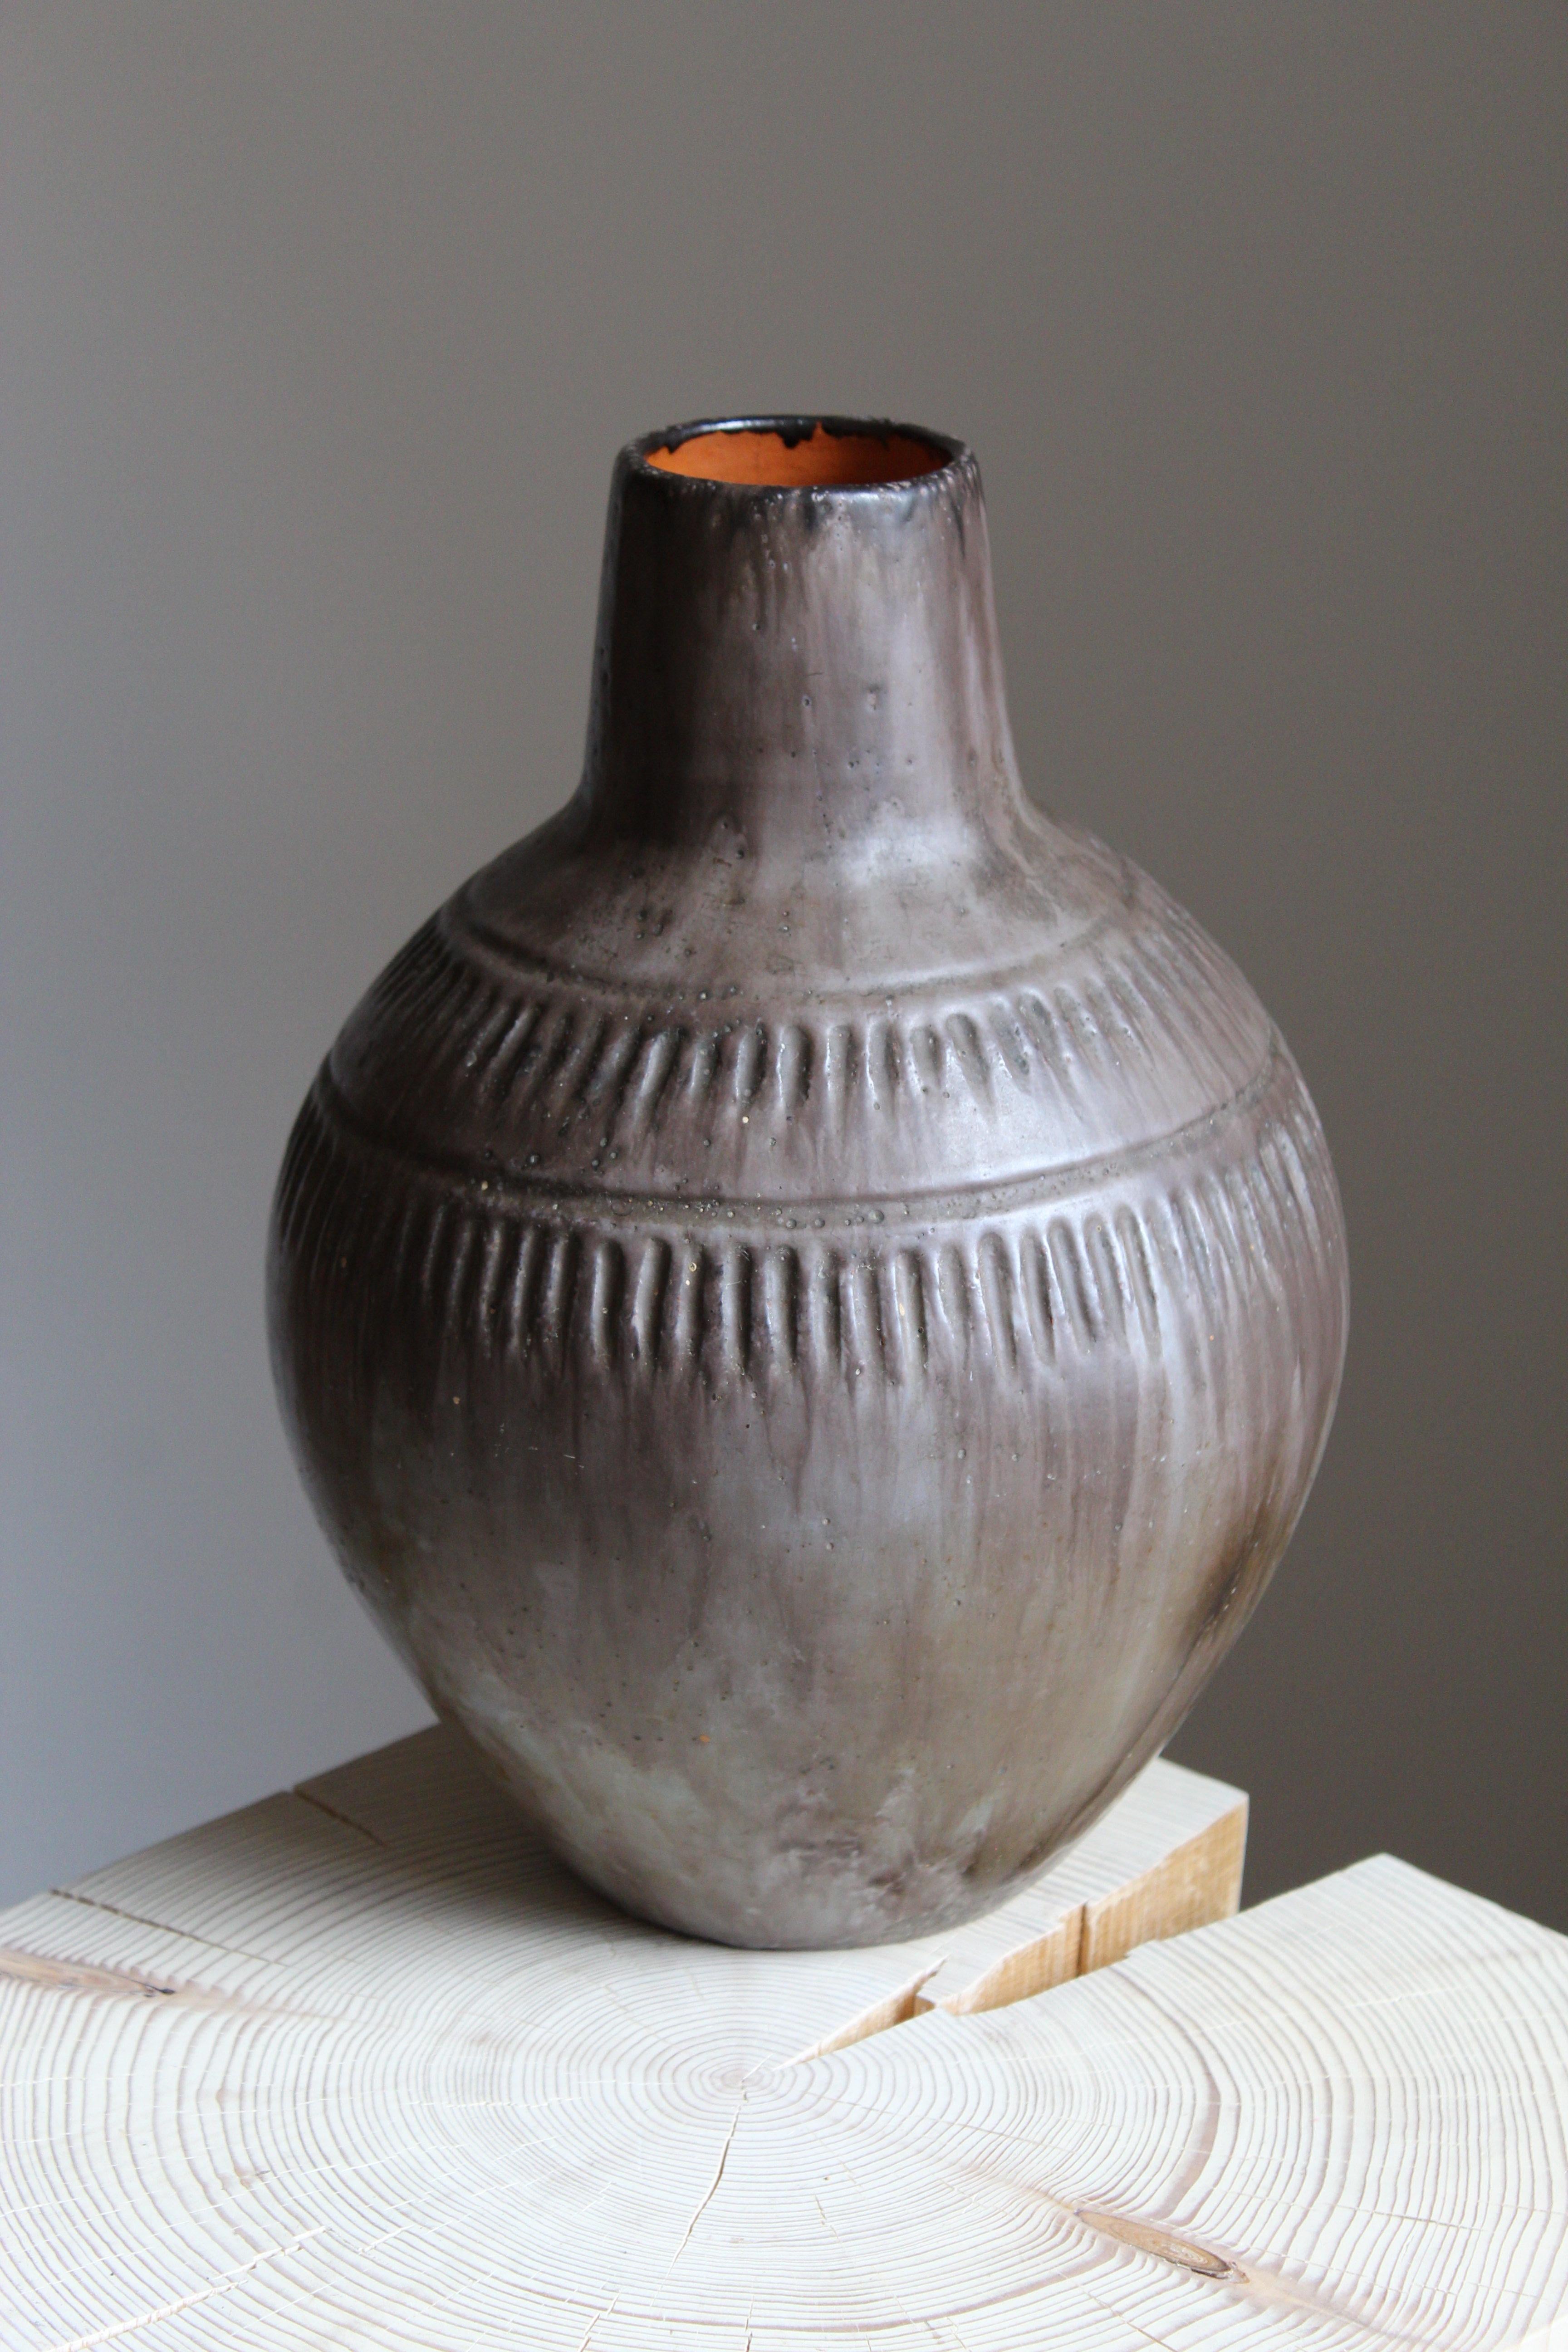 A sizable earthenware vase. Designed and produced by Hildur Haggård (1885- 1958). Painted earthenware featuring simple incised ornamentation.